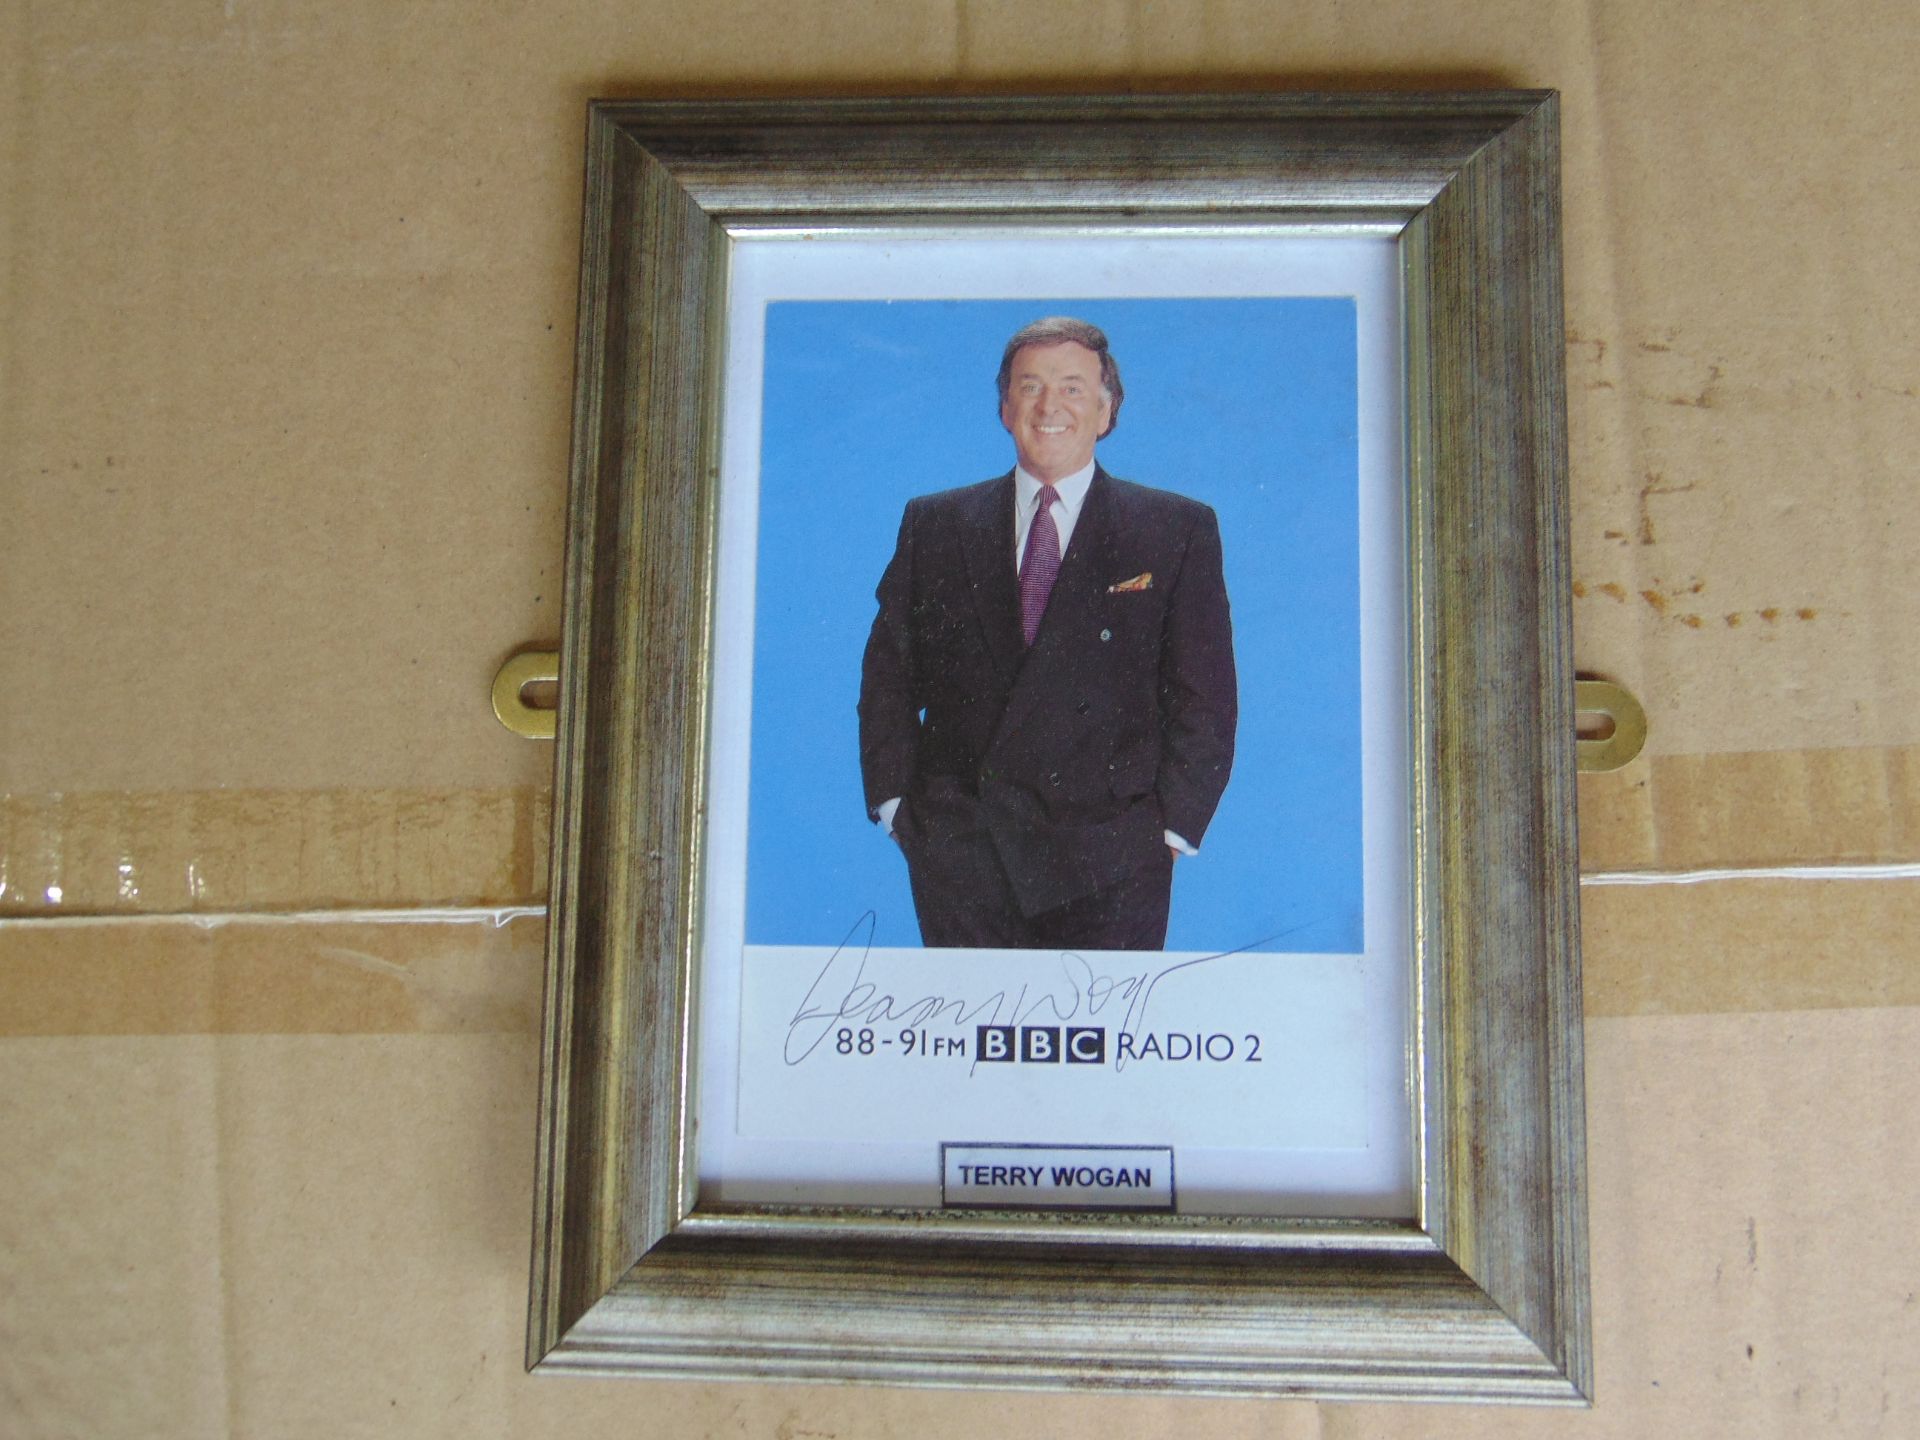 NICE SIGNED PICTURE OF TERRY WOGAN IN FRAME - Image 3 of 3